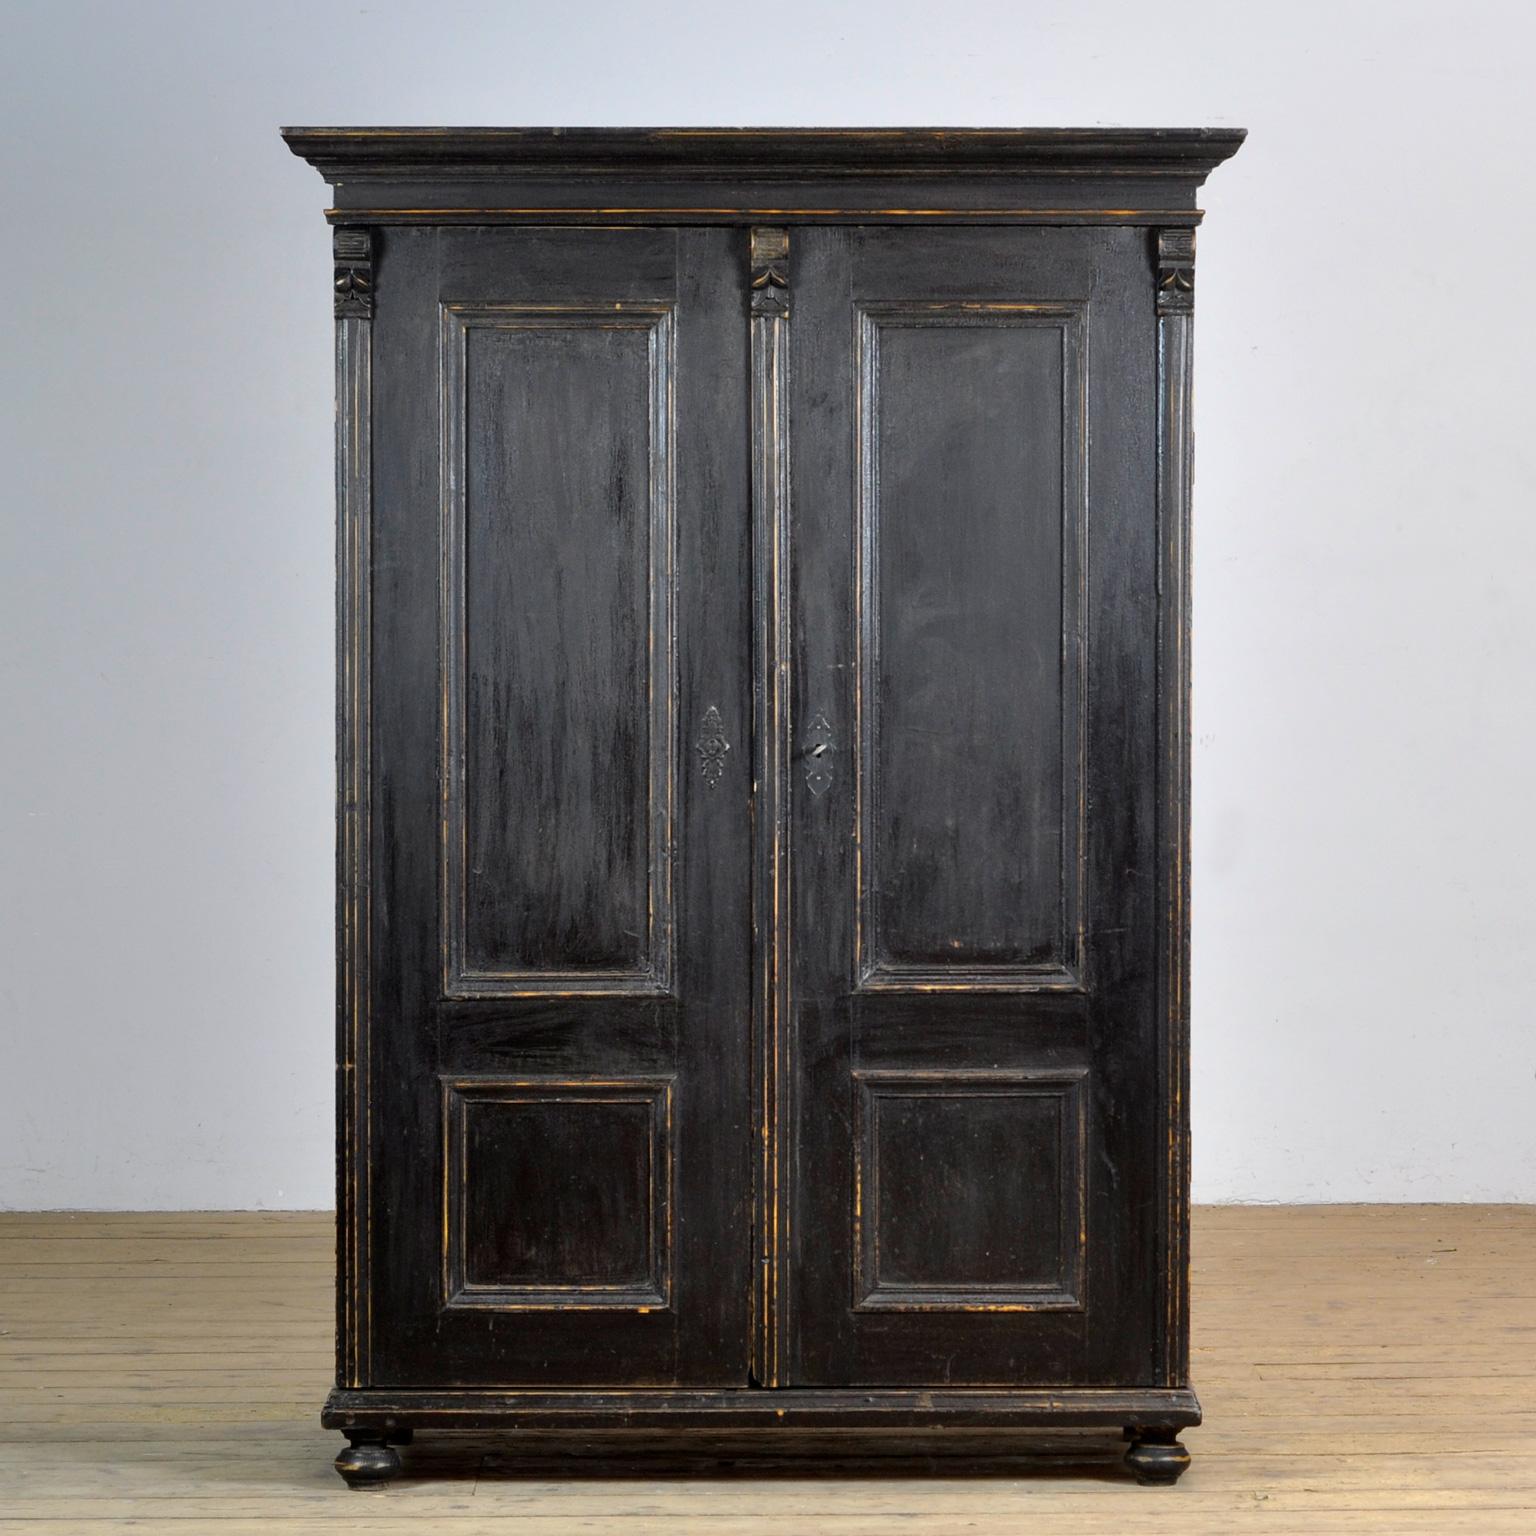 Pine wardrobe from circa 1920 with the original paint. With paneled doors and columns on the sides and center. Inside 1 shelf and clothes hooks. Original hinges and locks.
Crest dimensions (w x d): 123 x 58 cm 